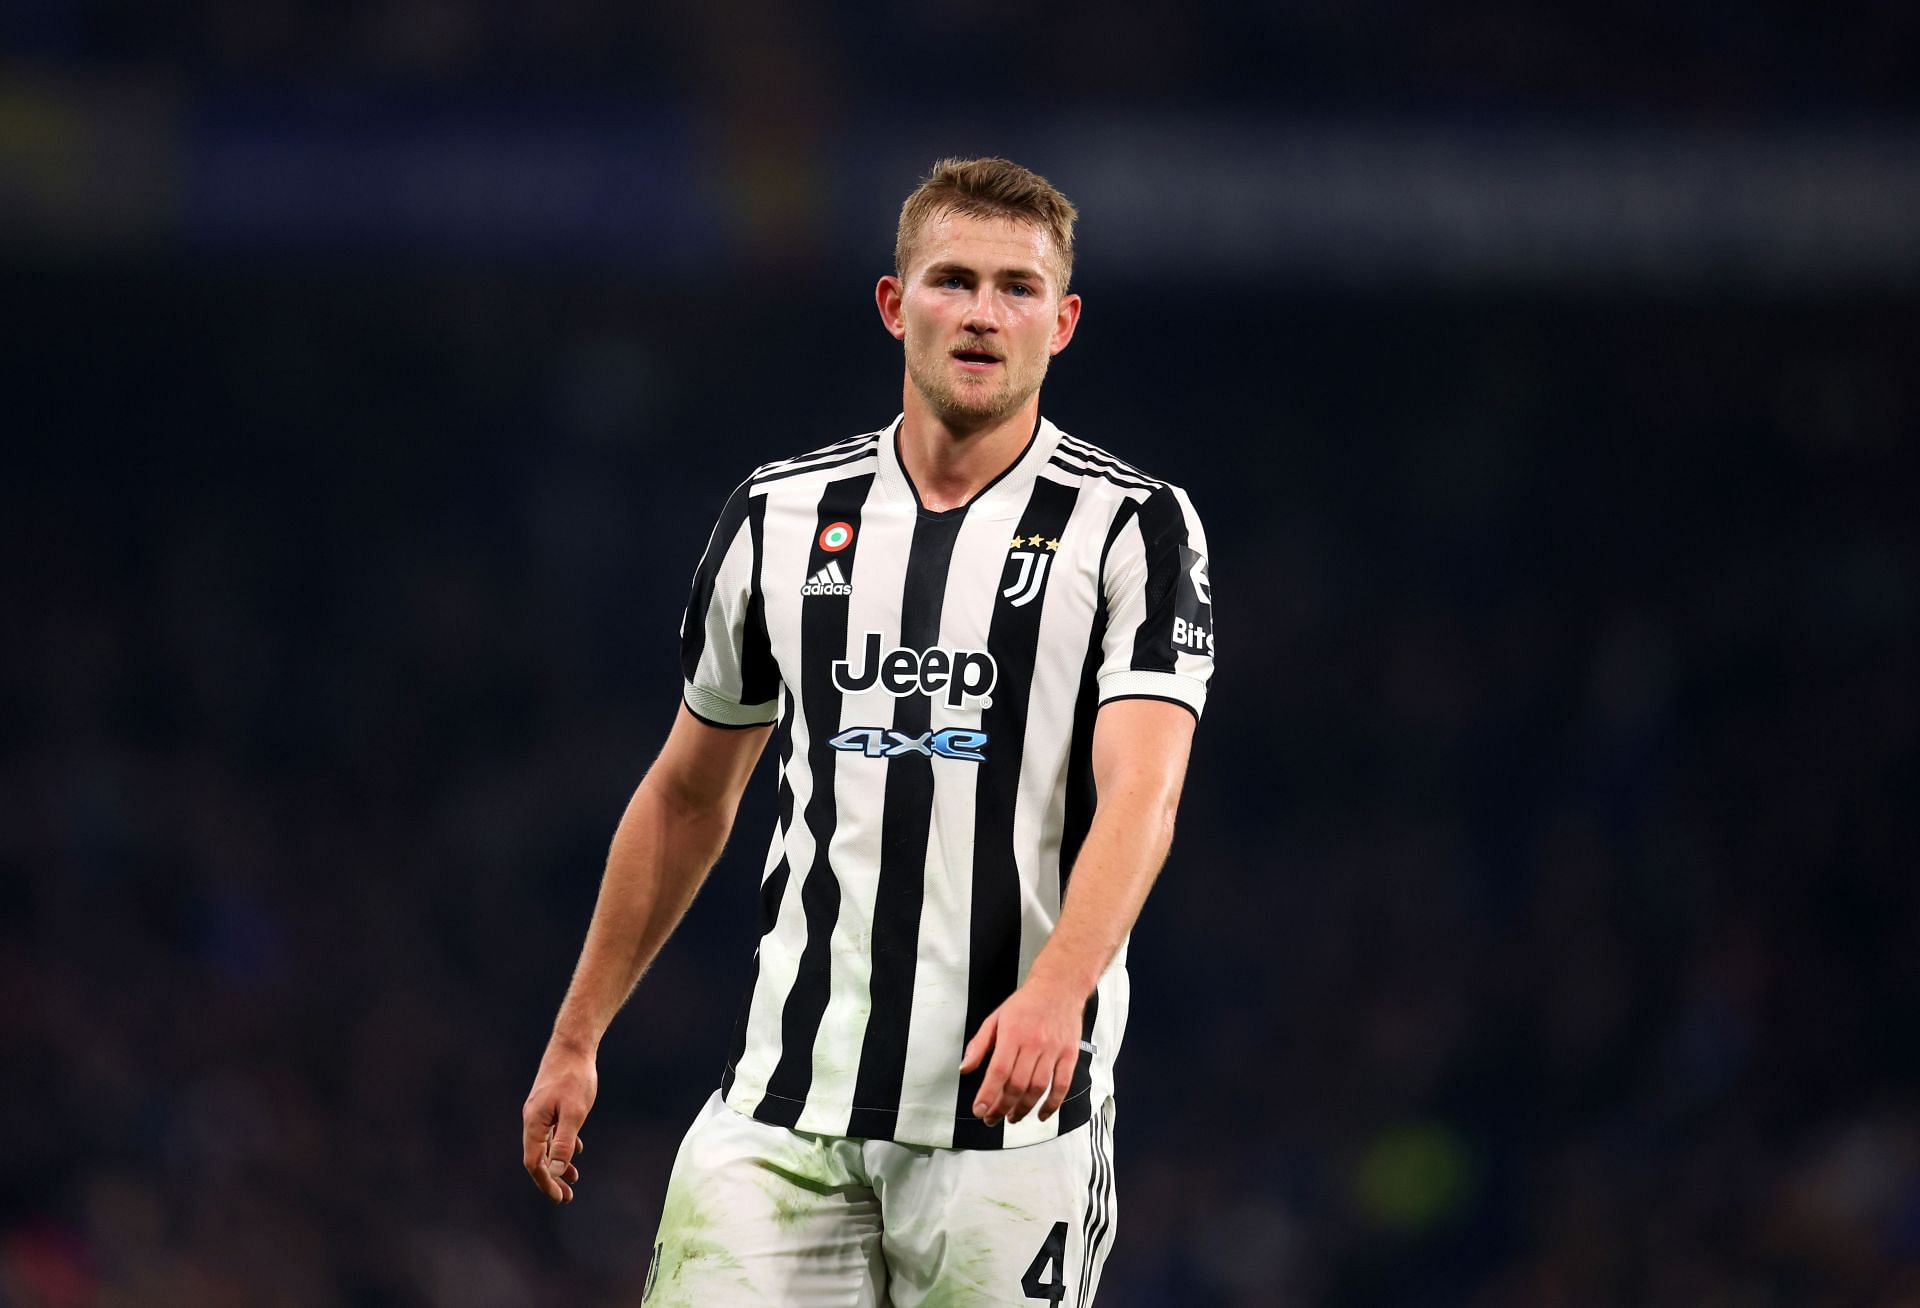 Barcelona are reportedly exploring the possibility of signing Matthijs de Ligt.